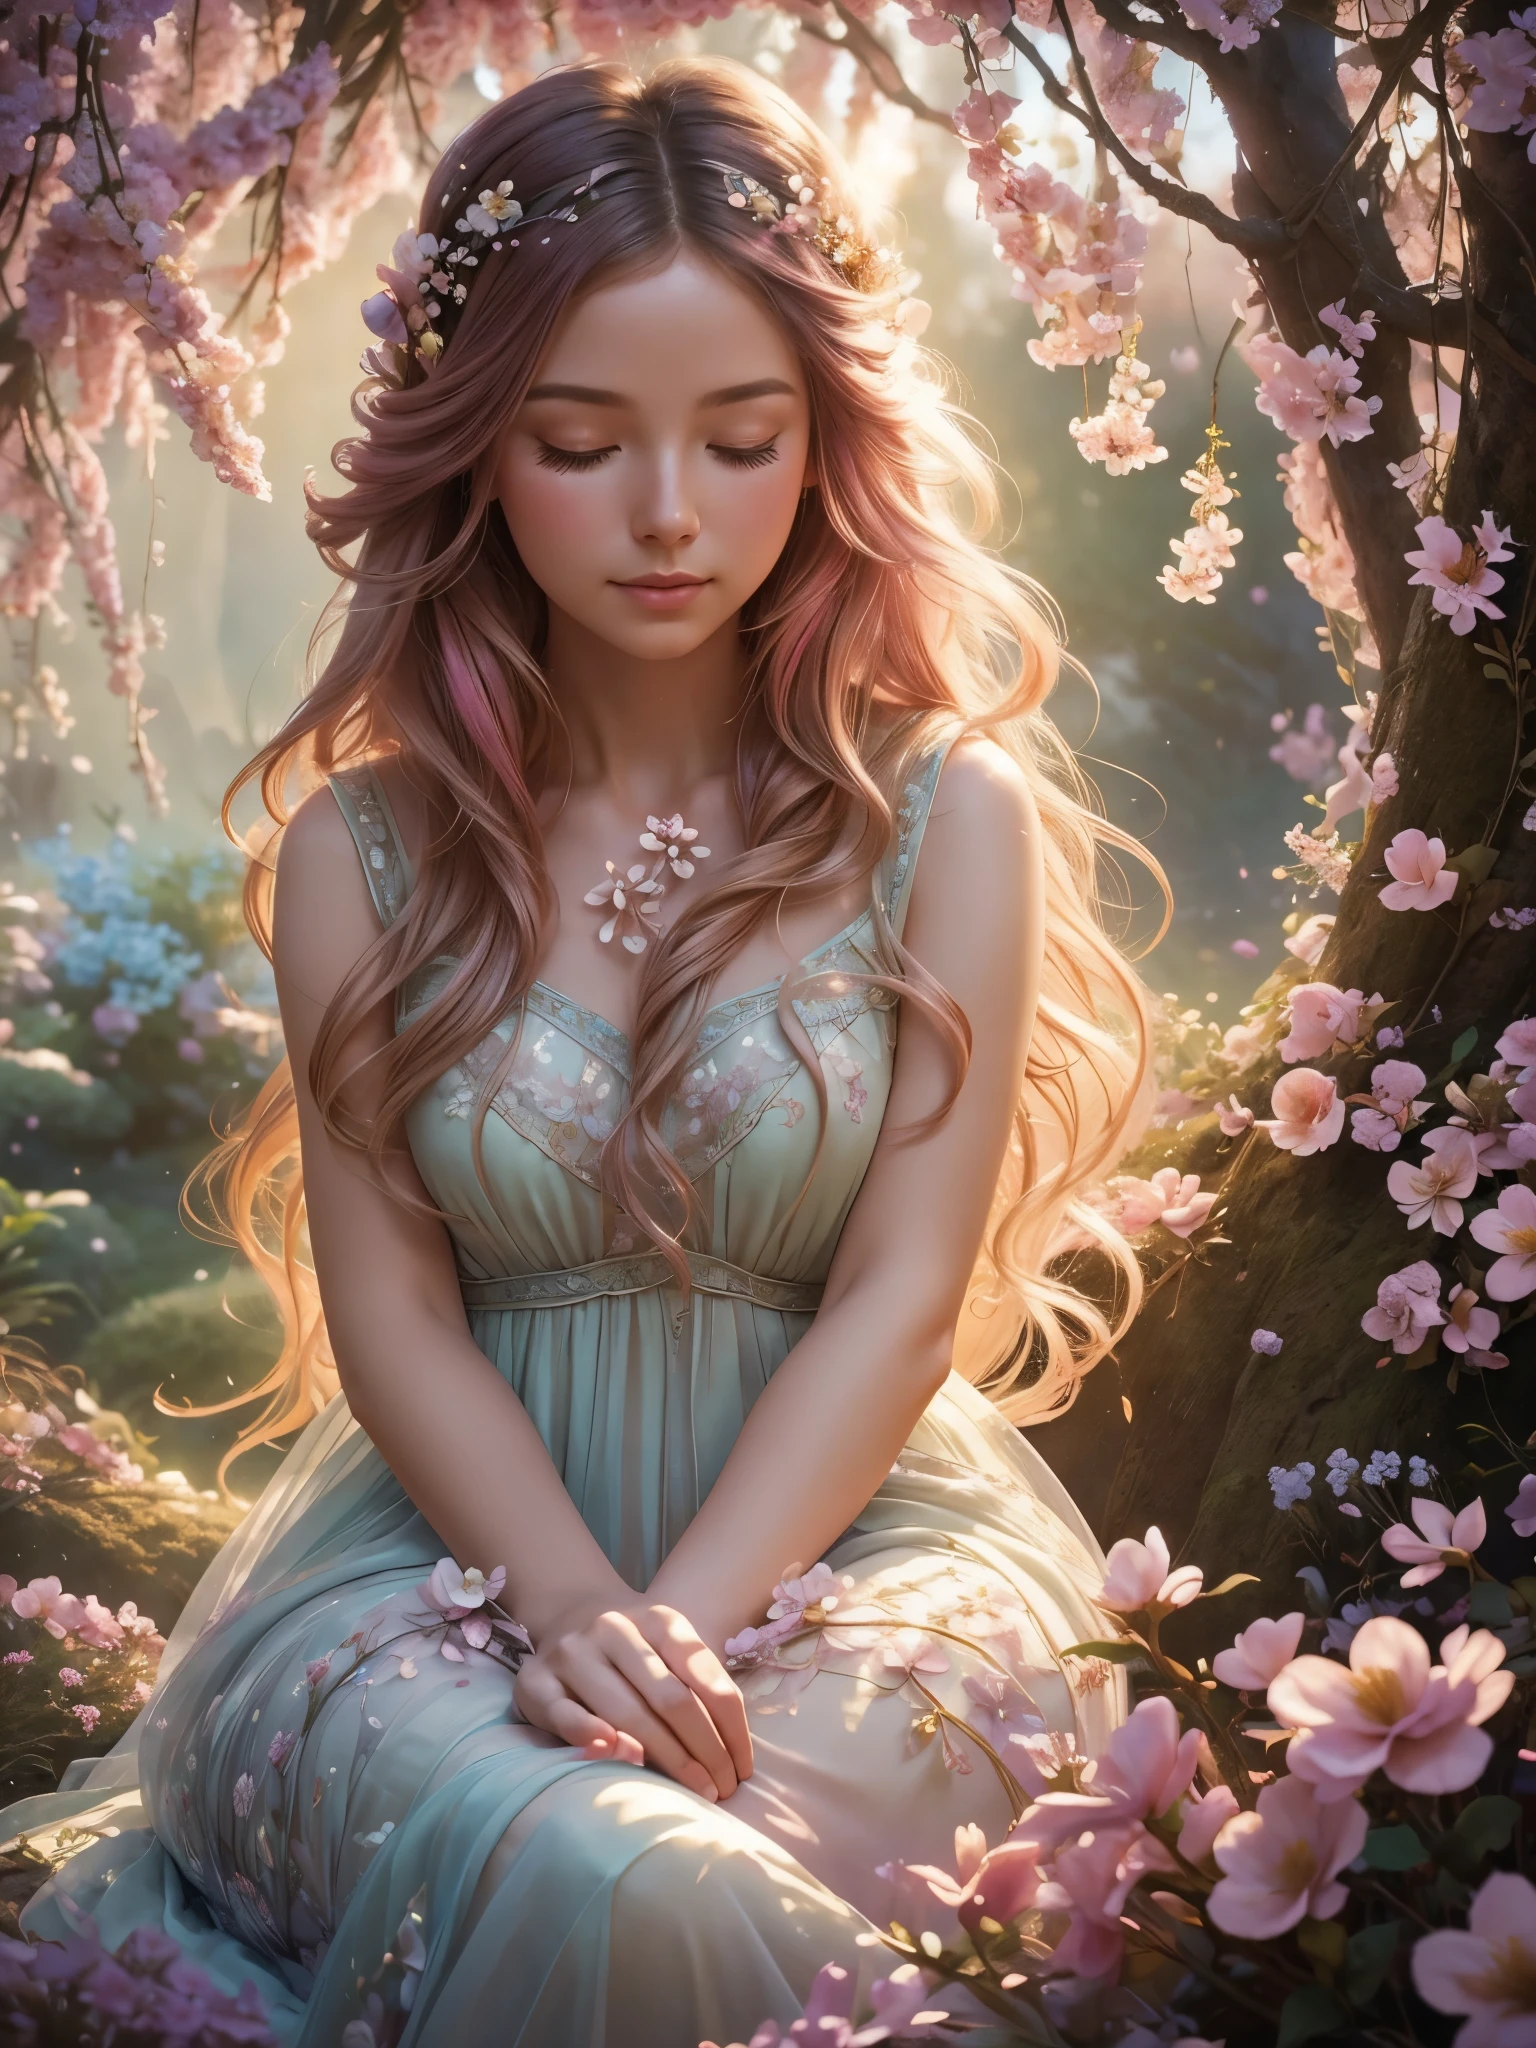 soft lighting, dreamy atmosphere, ethereal aesthetic, fantasy theme, nature elements, floral background, delicate details, flowing hair, whimsical pose, vibrant colors, sitting, hands folded, eyes closed